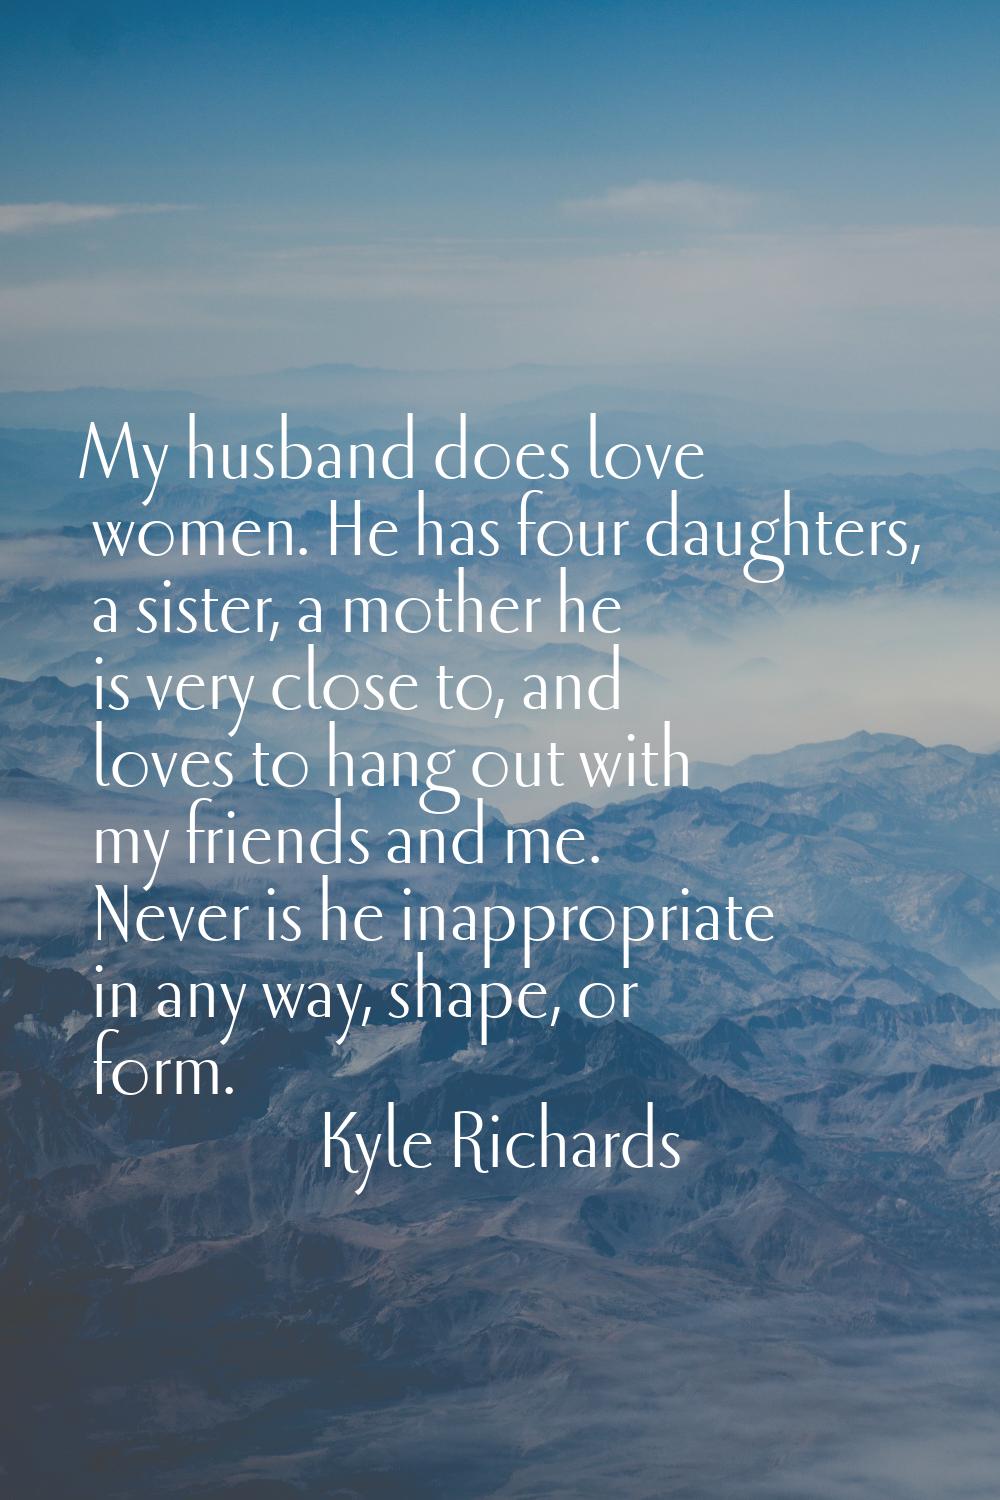 My husband does love women. He has four daughters, a sister, a mother he is very close to, and love